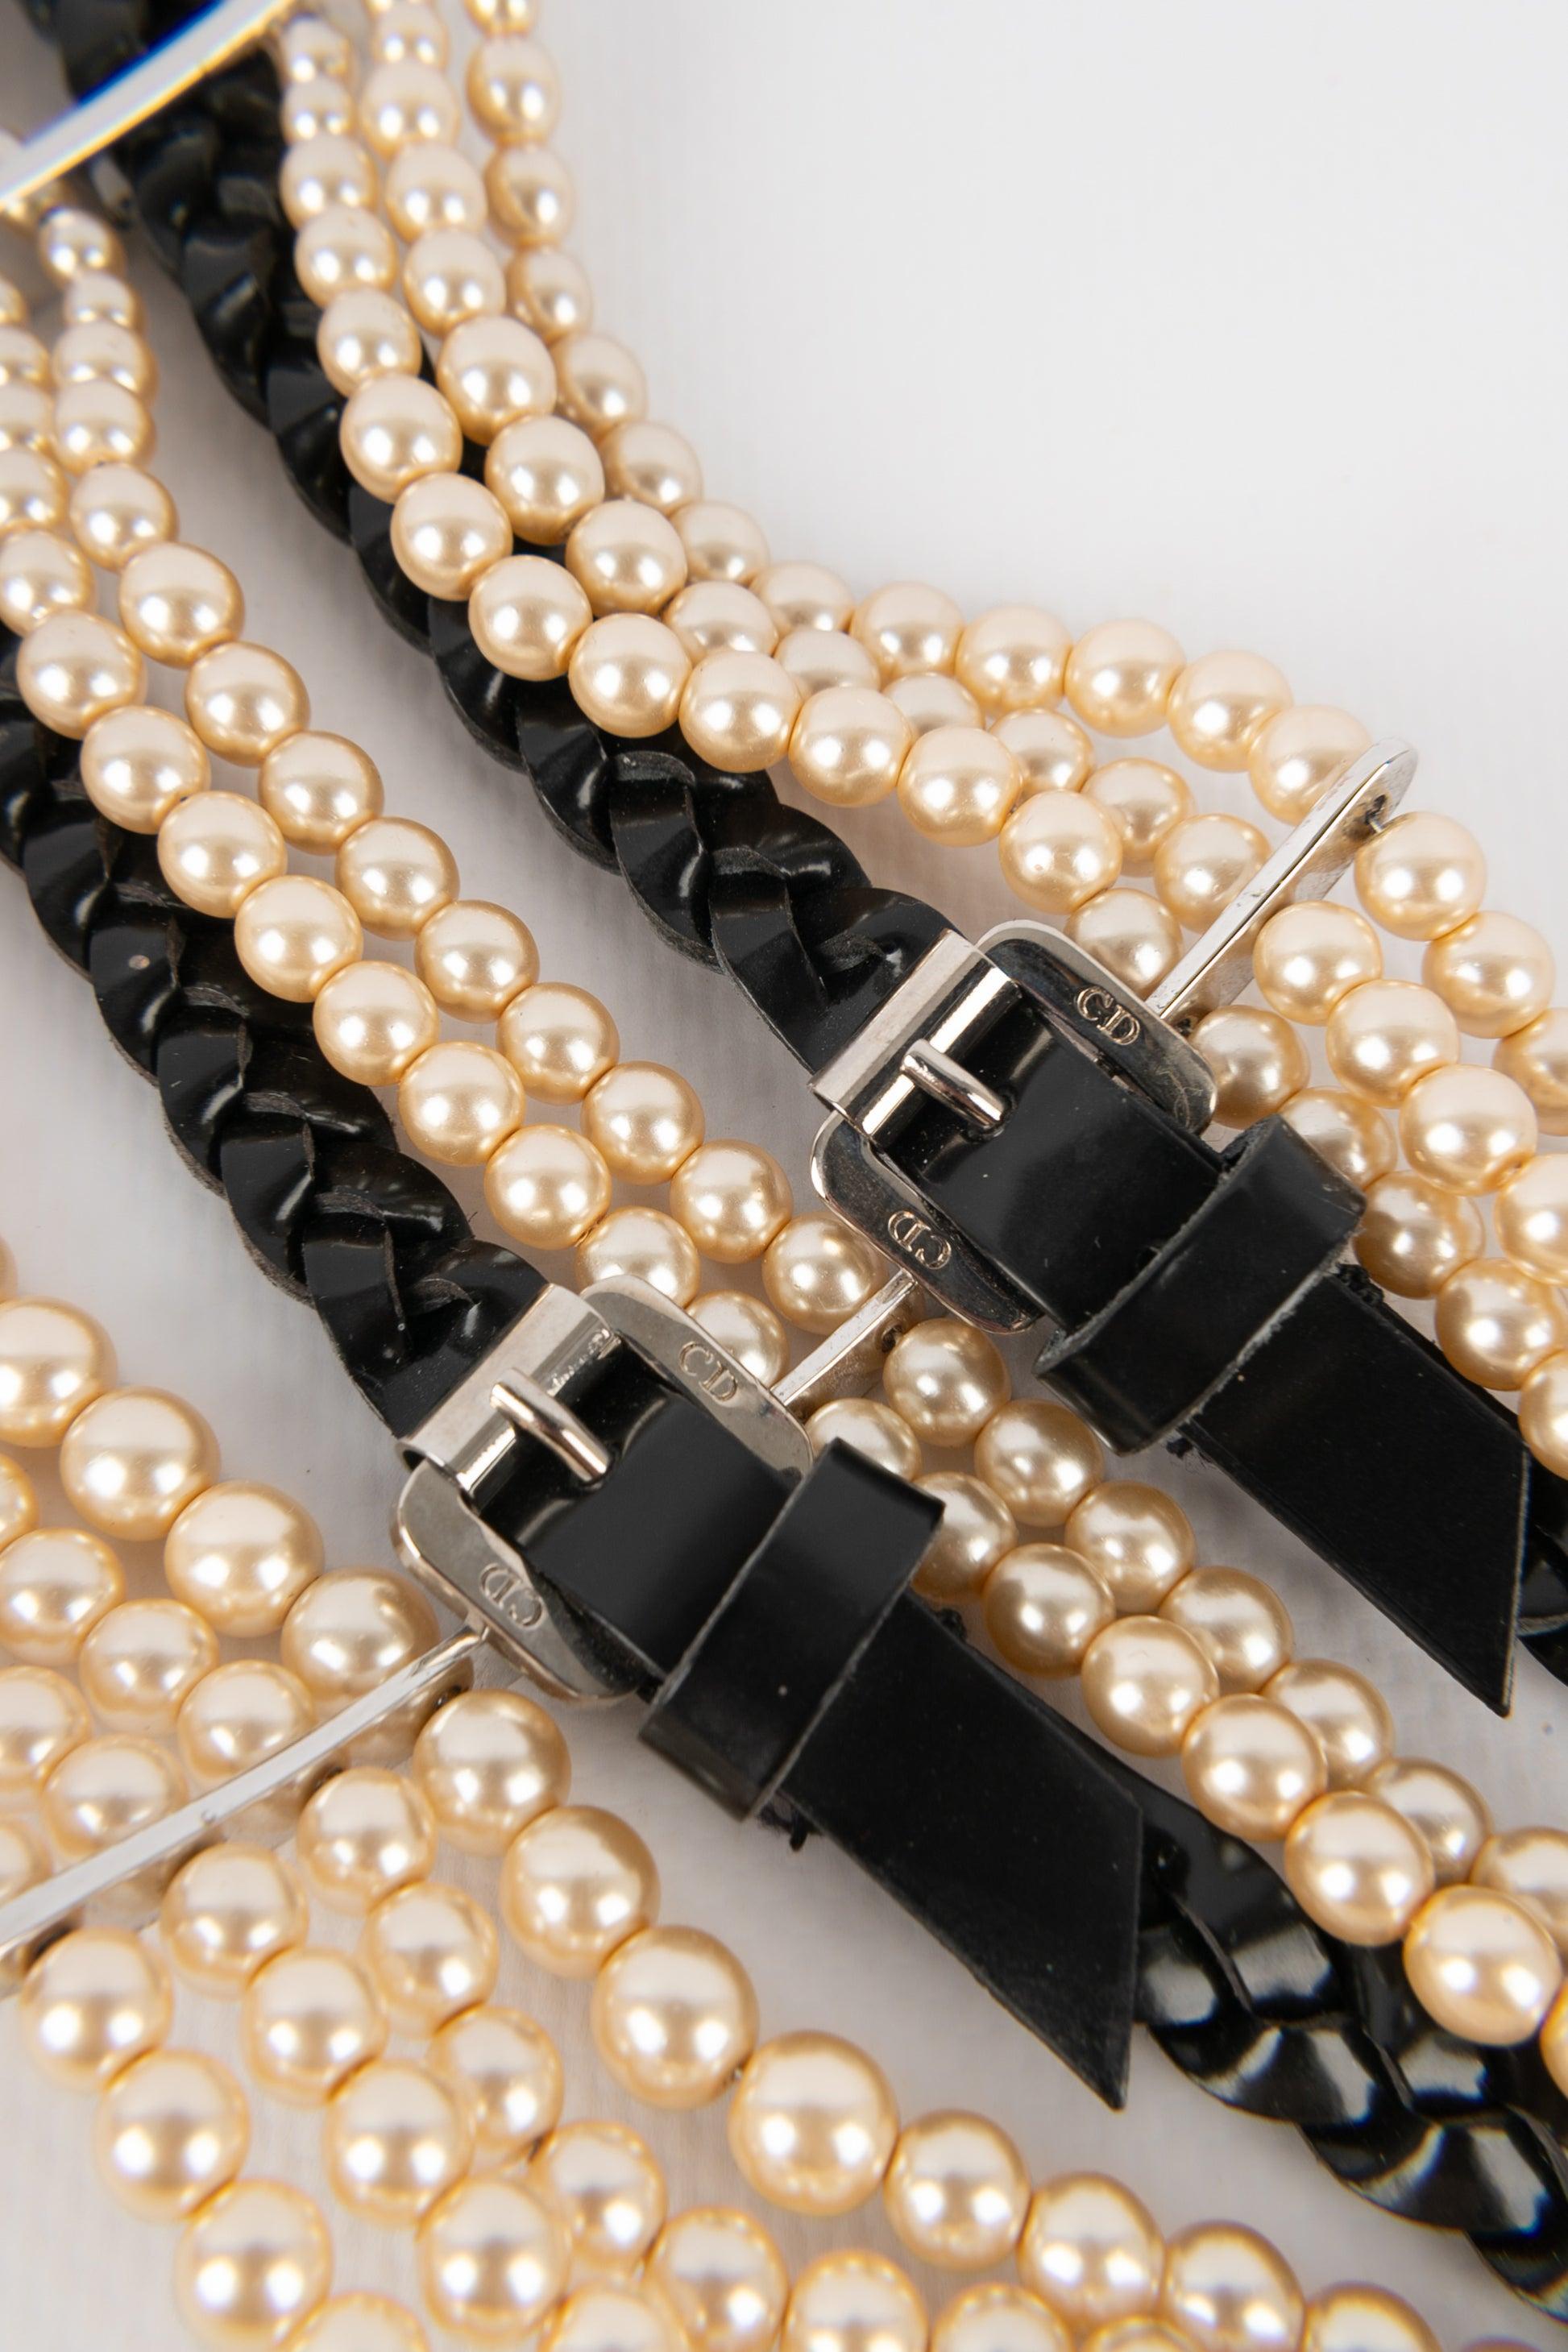 Women's Christian Dior Massaï Necklace with Pearls and Black Leather, 2004